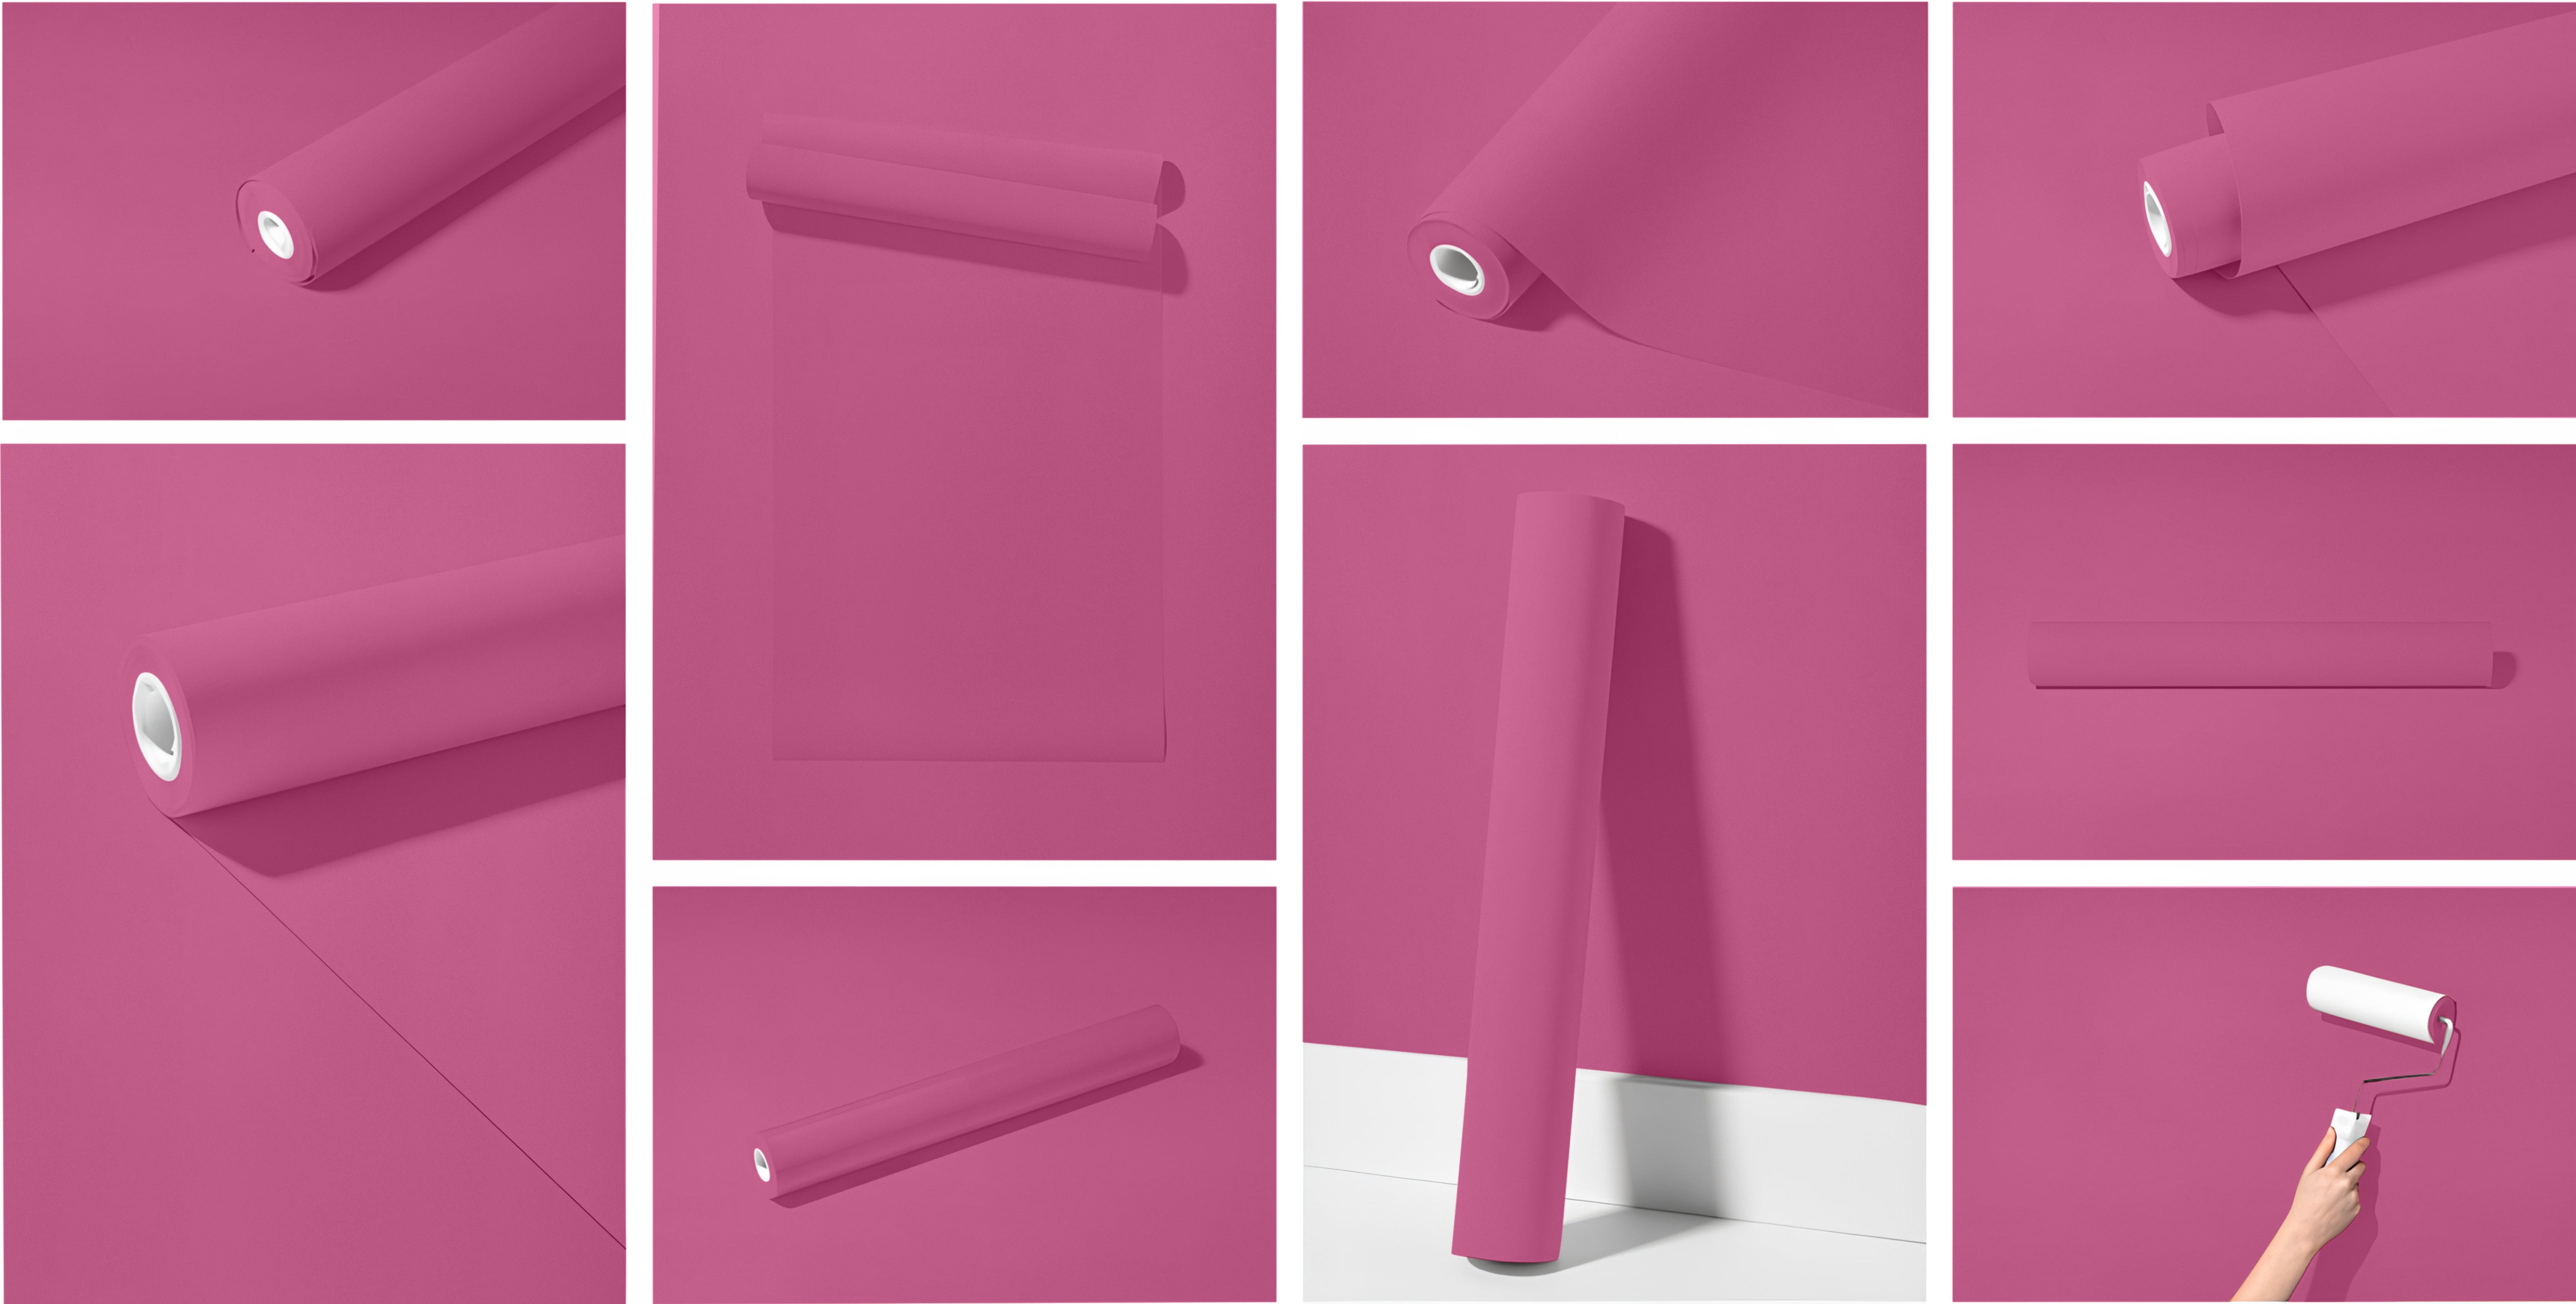 Peel & Stick Removable Re-usable Paint - Color RAL 4003 Heather Violet - offRAL™ - RALRAW LLC, USA